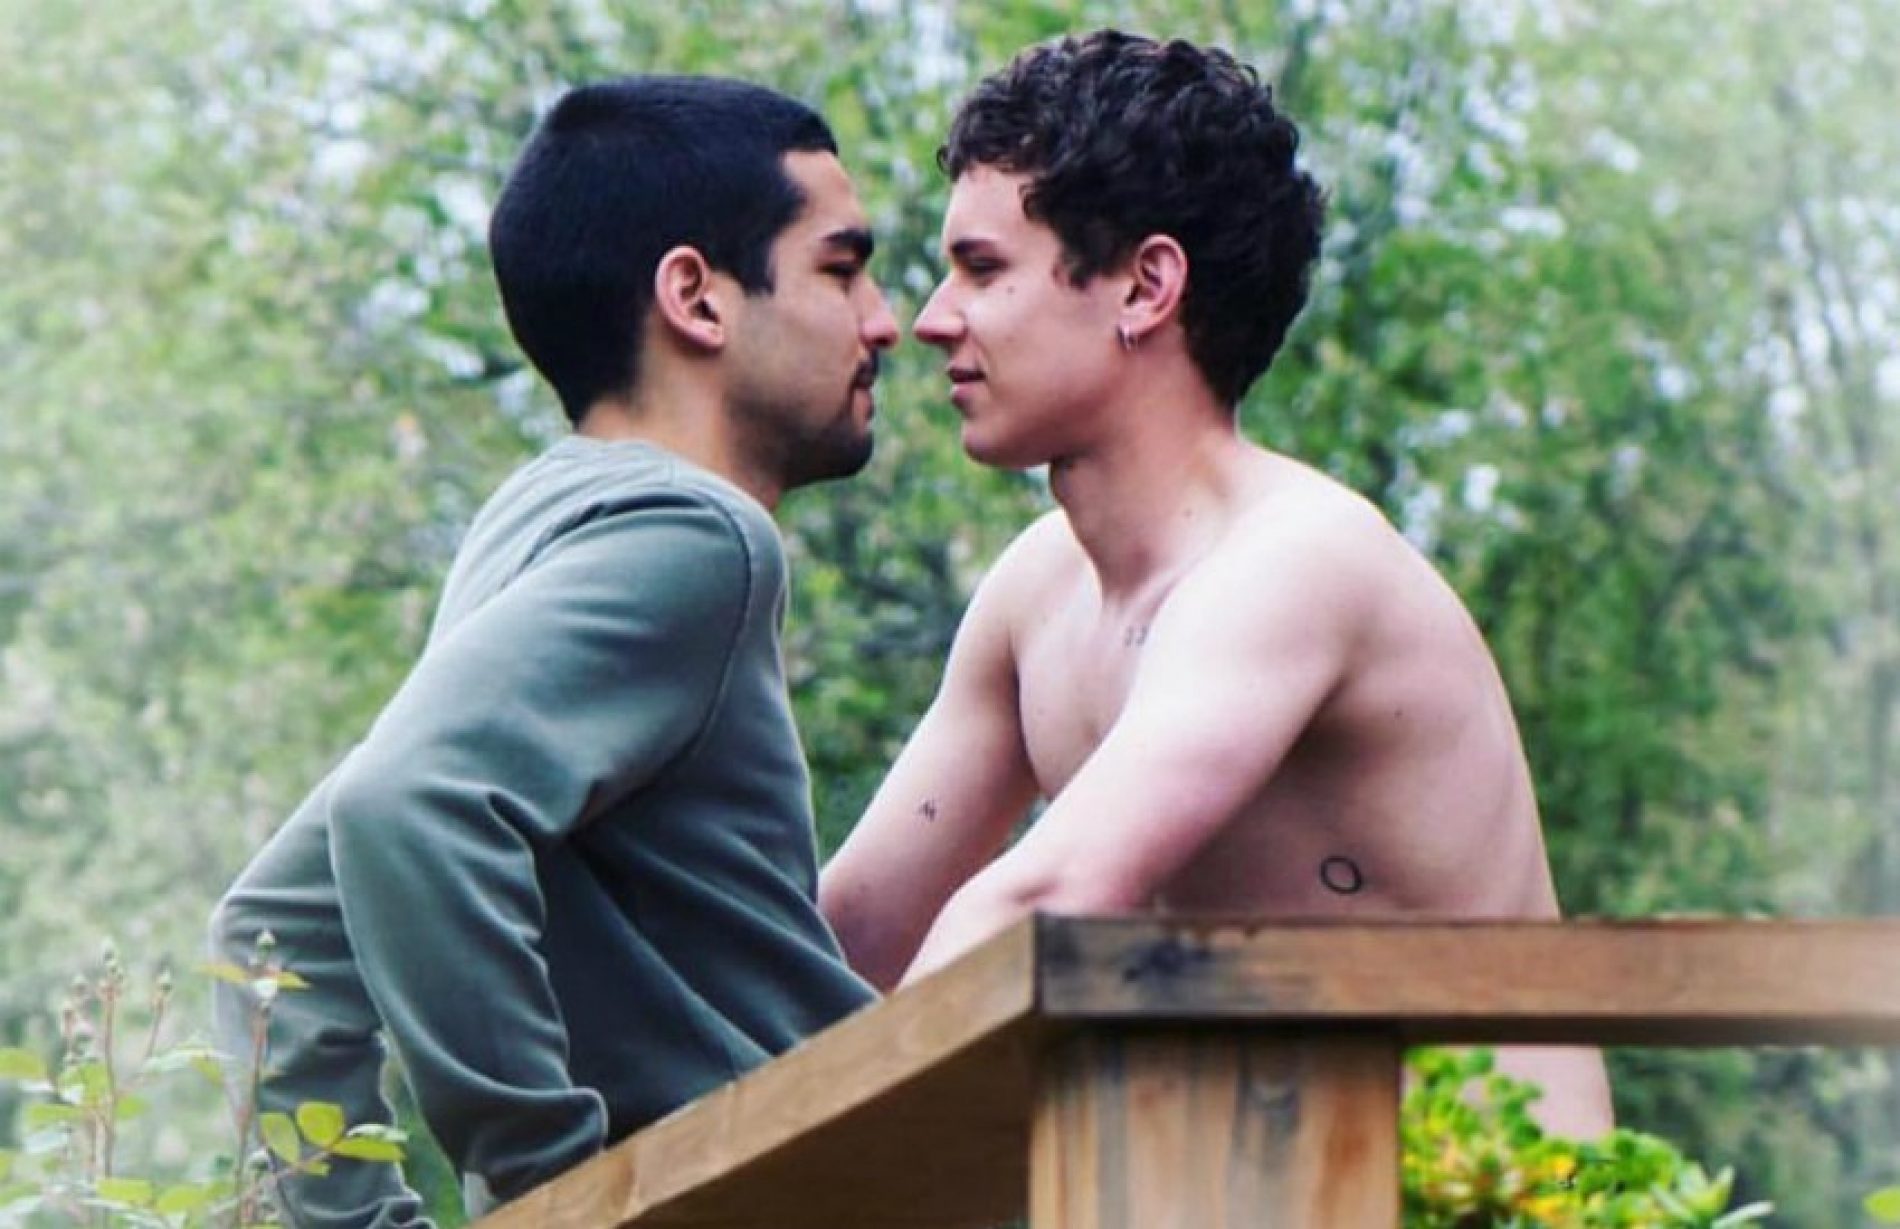 Netflix’s perfect clapback at homophobe disgusted over gay love story in show ‘Elite’